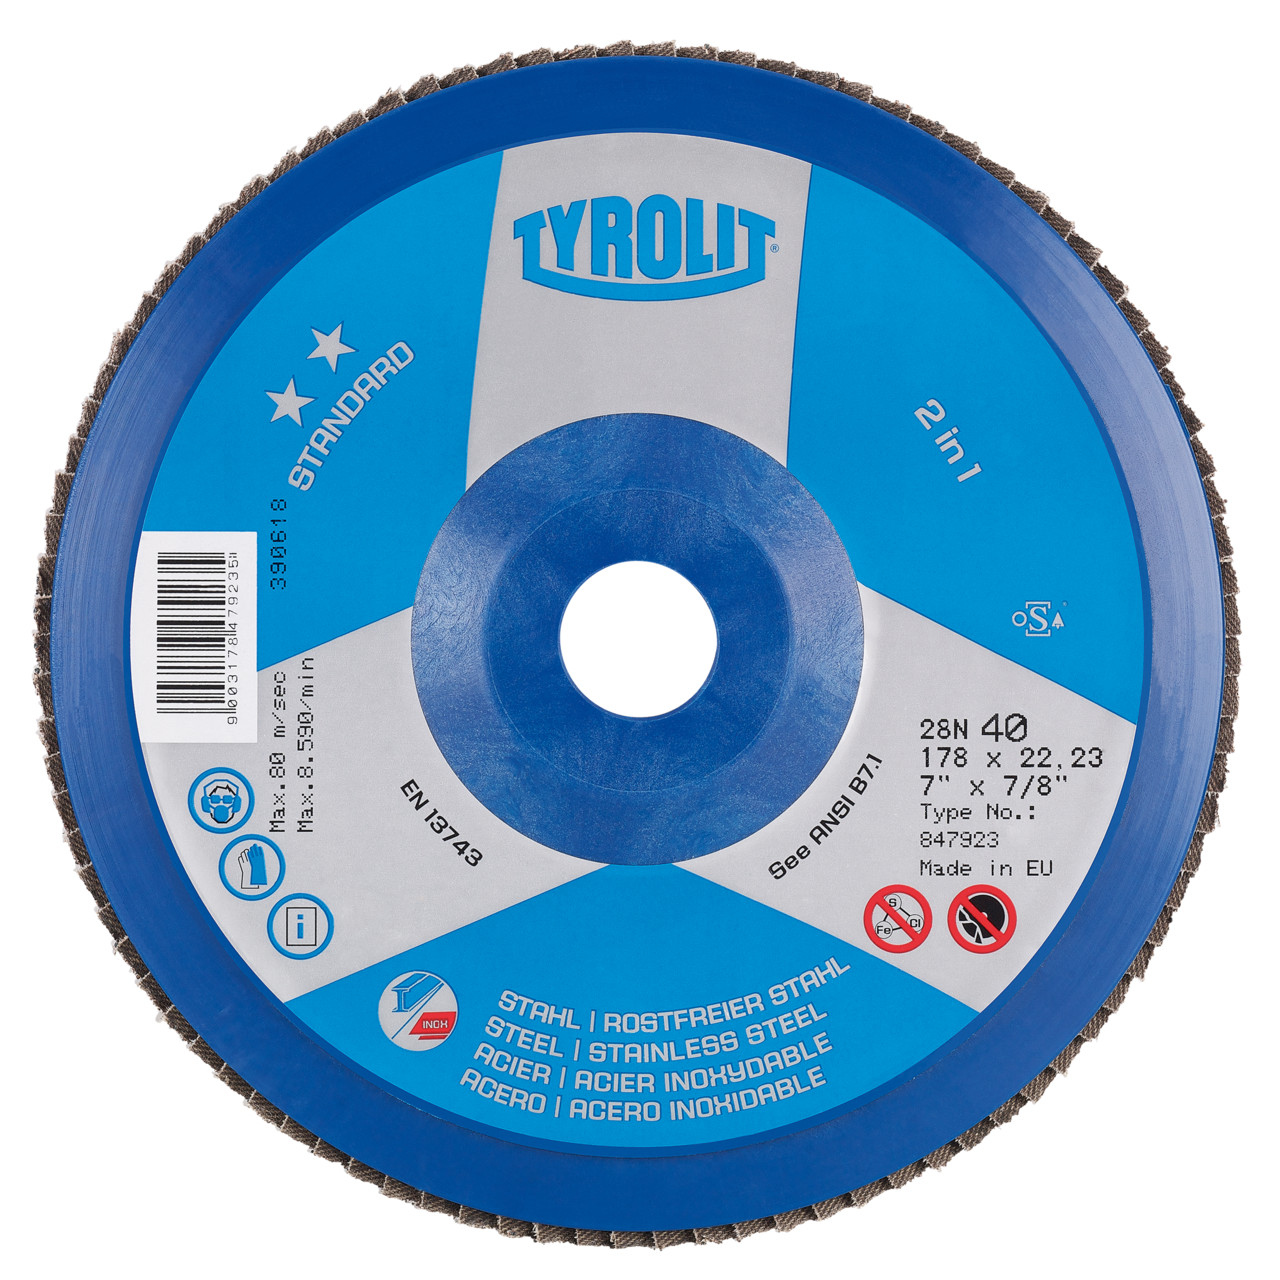 Tyrolit Serrated lock washer DxH 115x22.2 2in1 for steel and stainless steel, P120, shape: 28N - straight version (plastic carrier body), Art. 247165